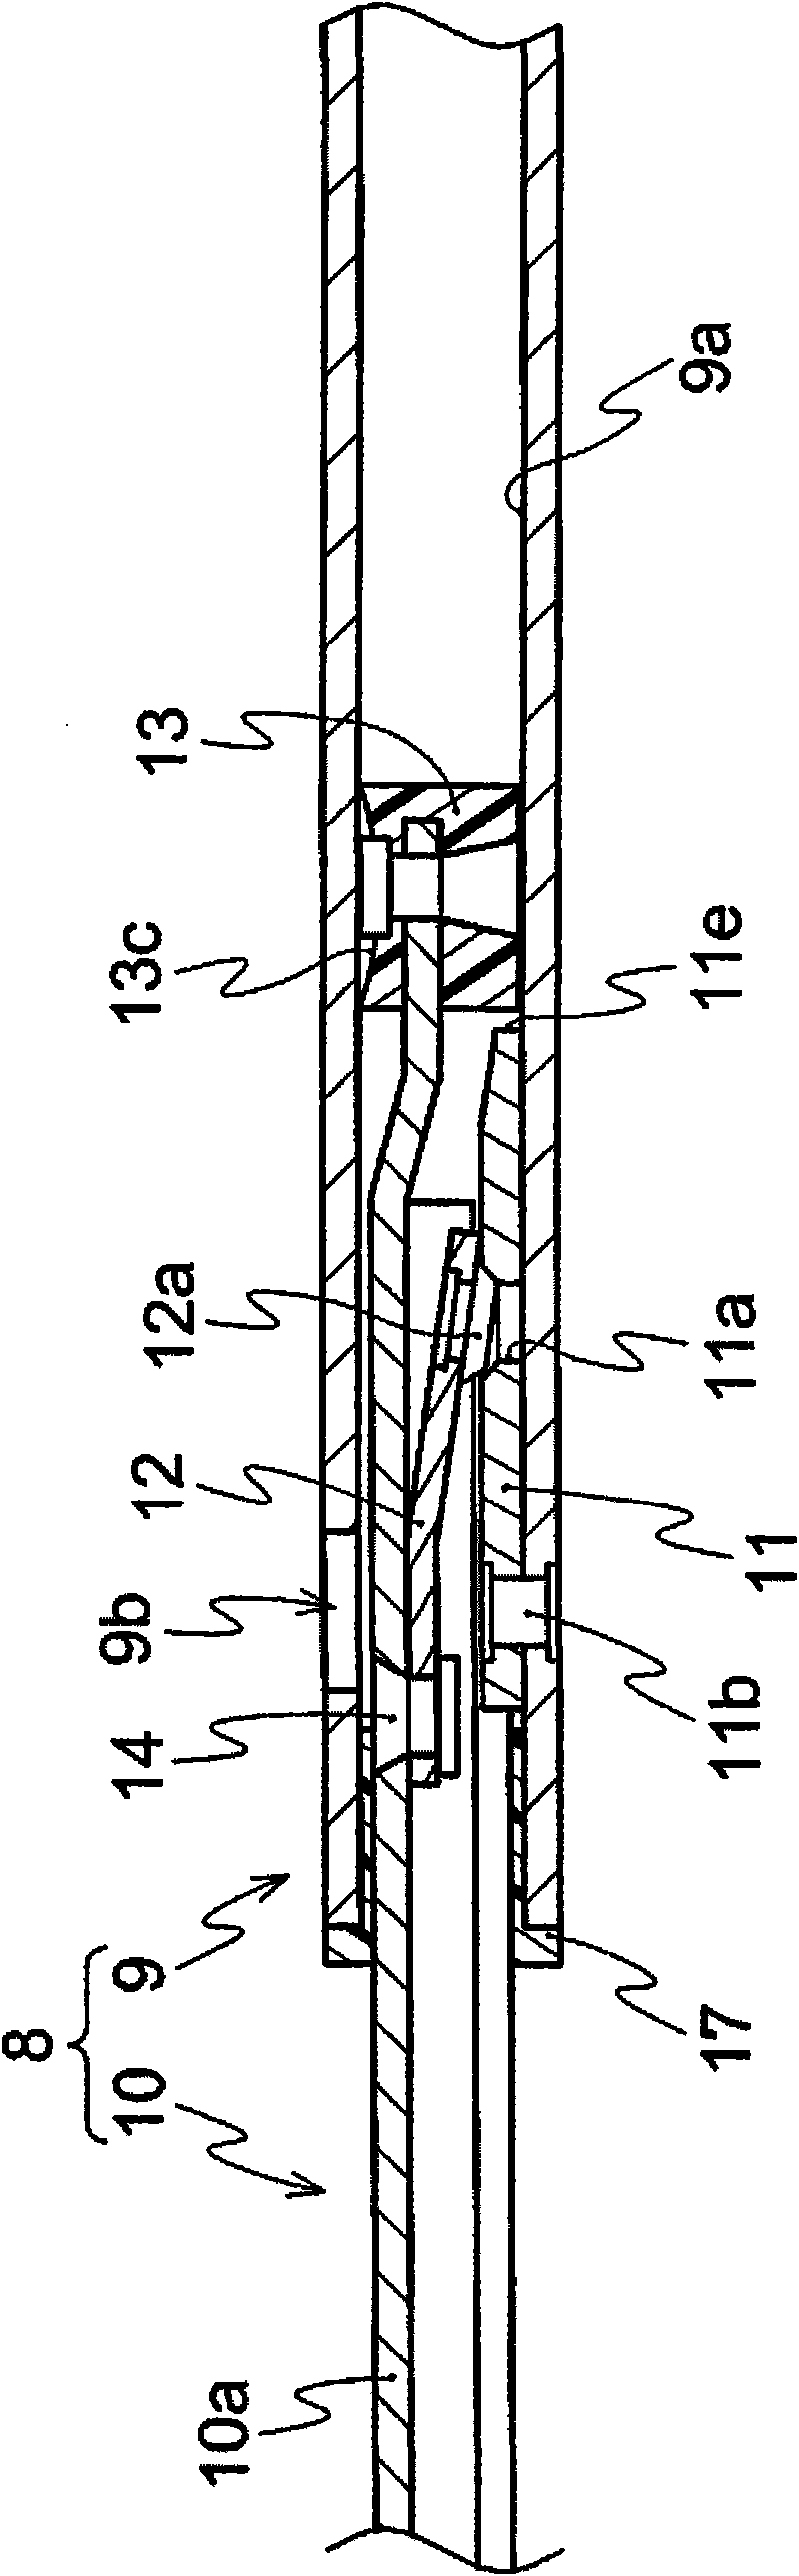 Opening/closing device of door and the like